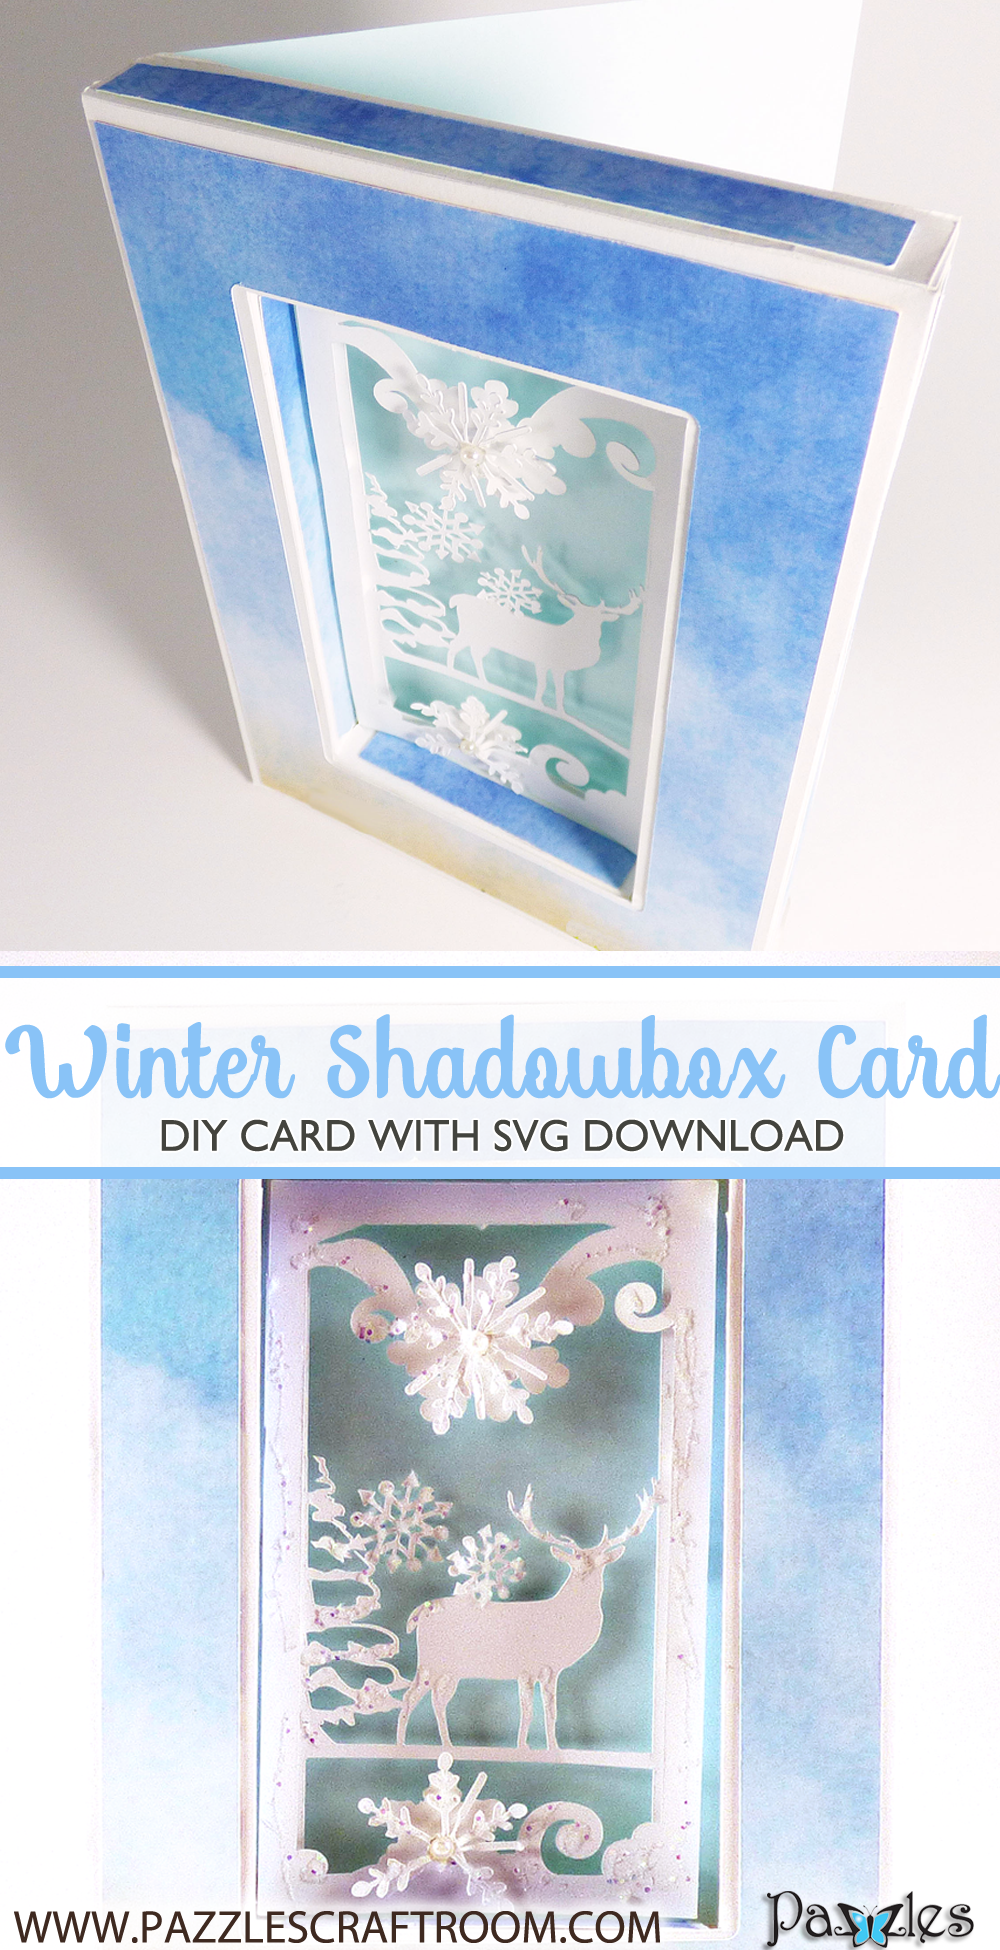 DIY Winter Shadow Box Card or Frame with instant SVG download - Pazzles